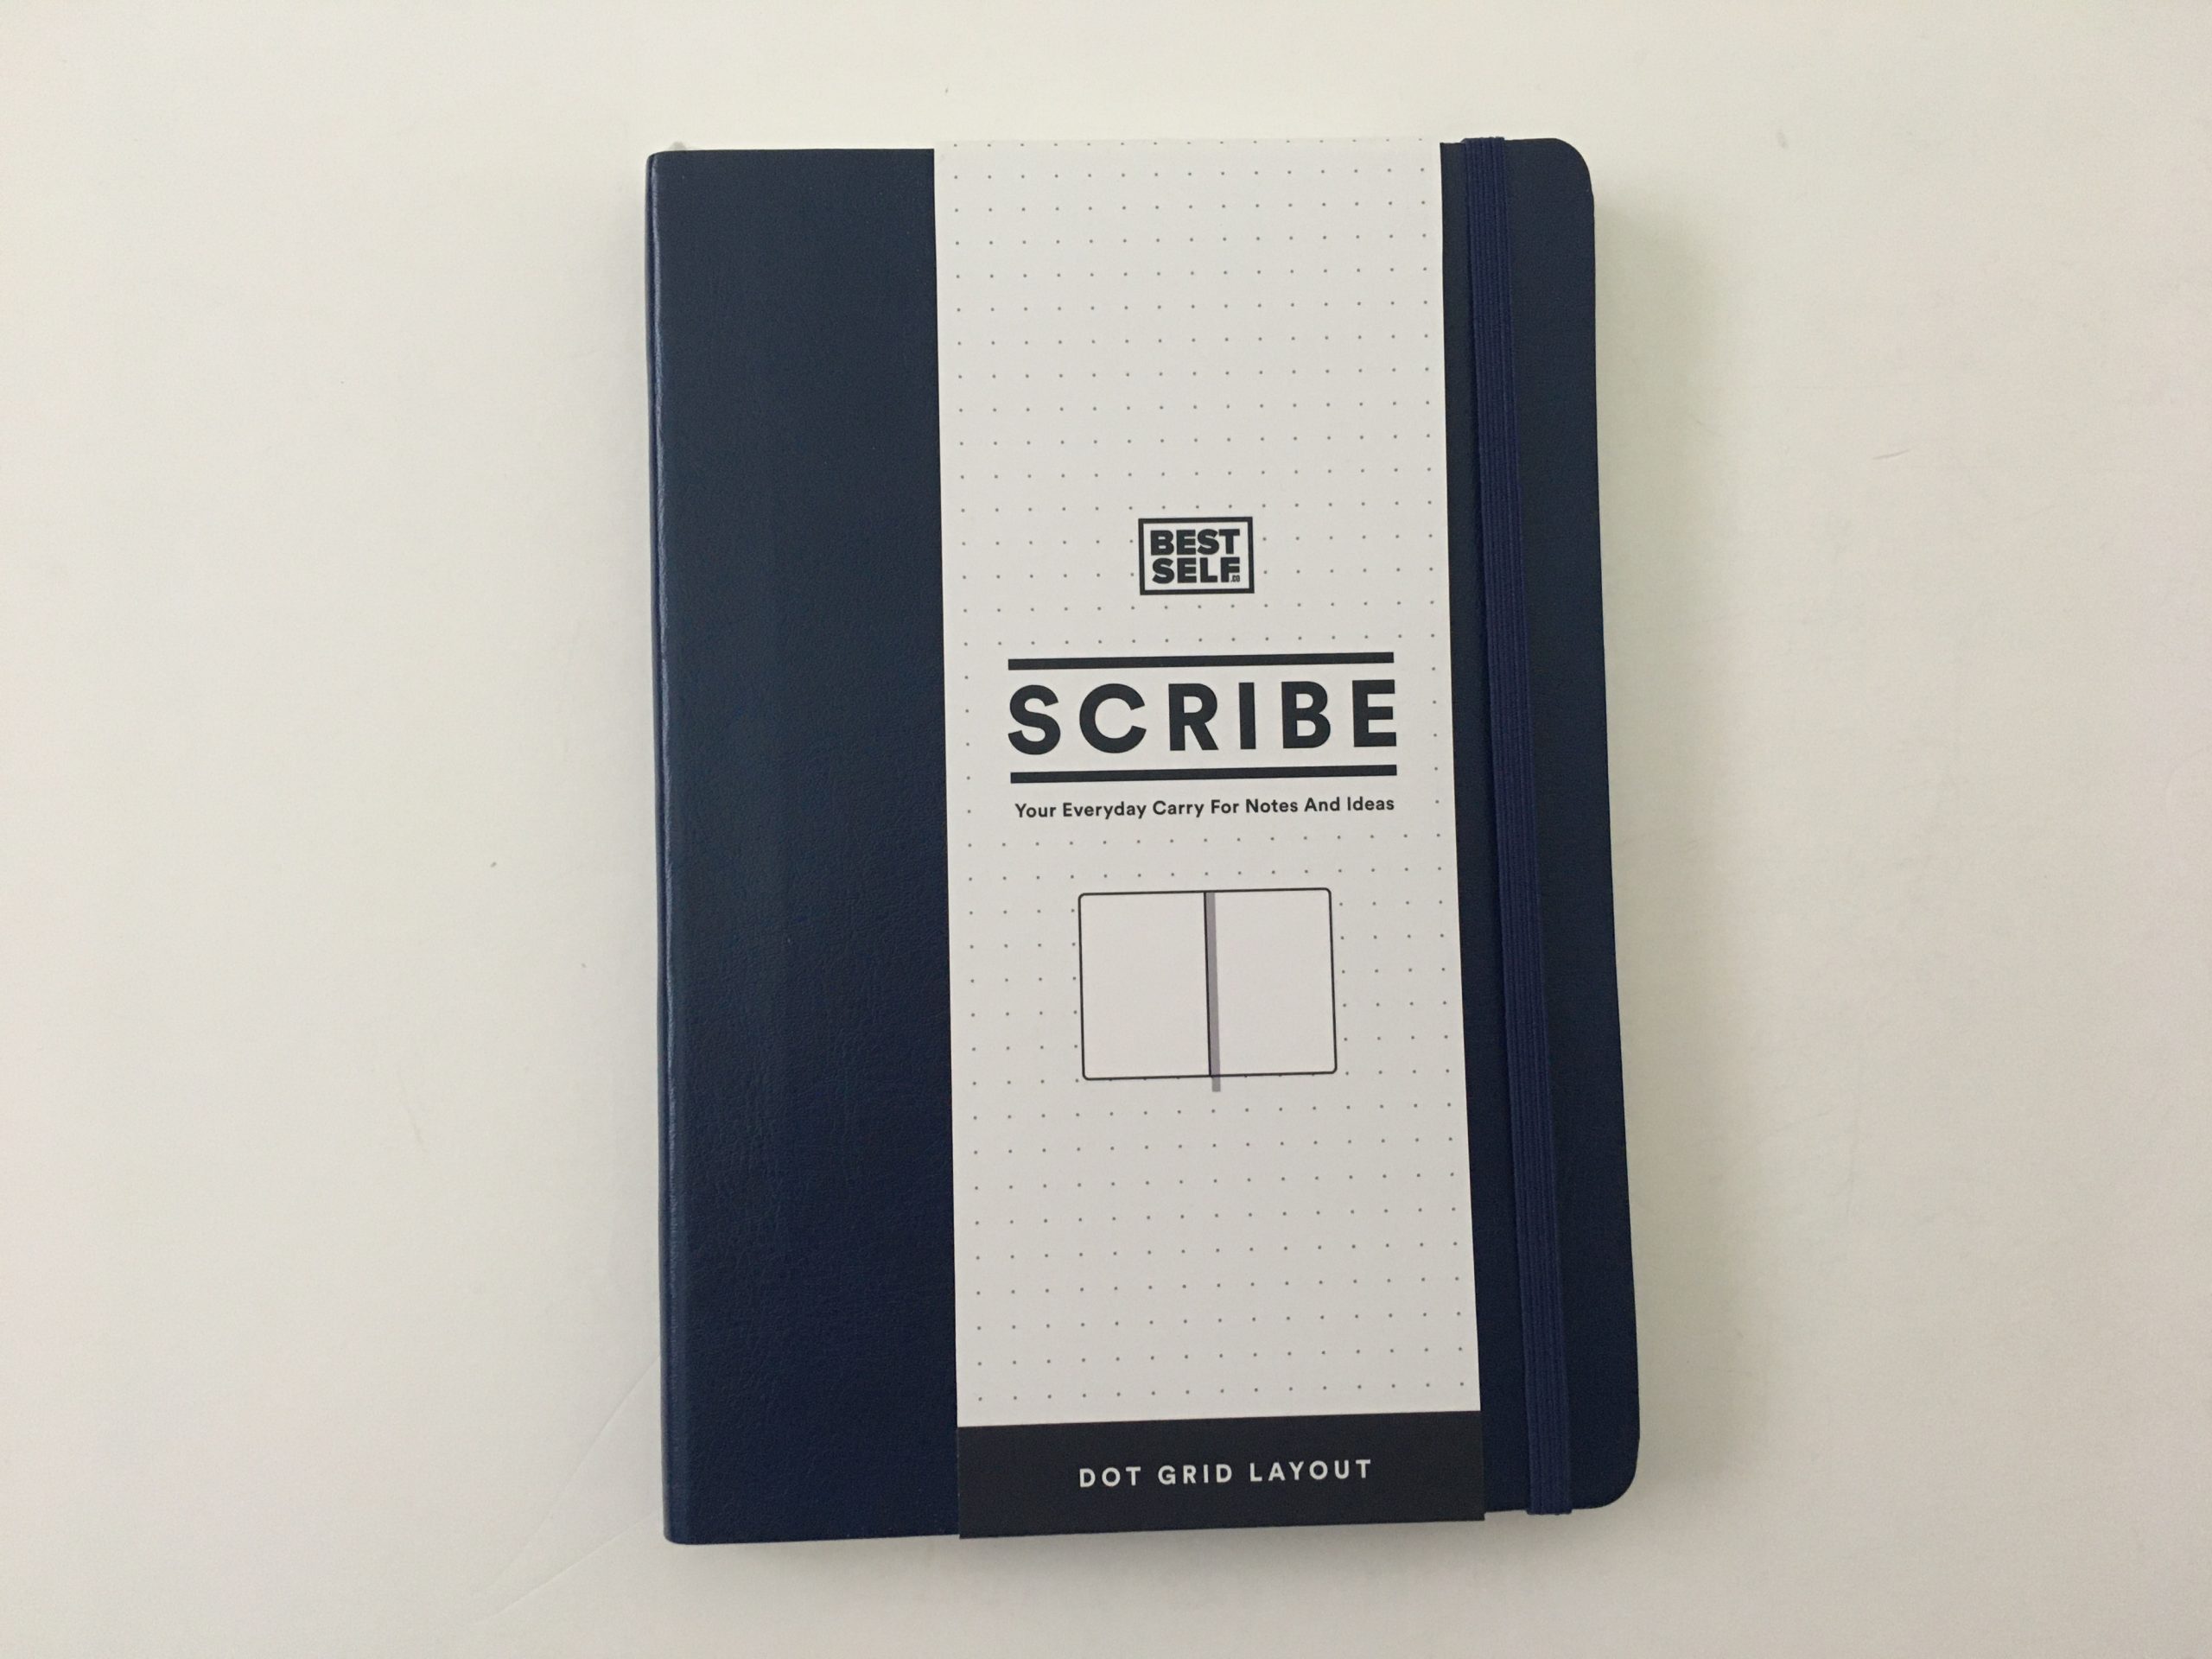 scribe dot grid notebook review pros and cons pen testing paper quality ivory paper 5mm dot grid